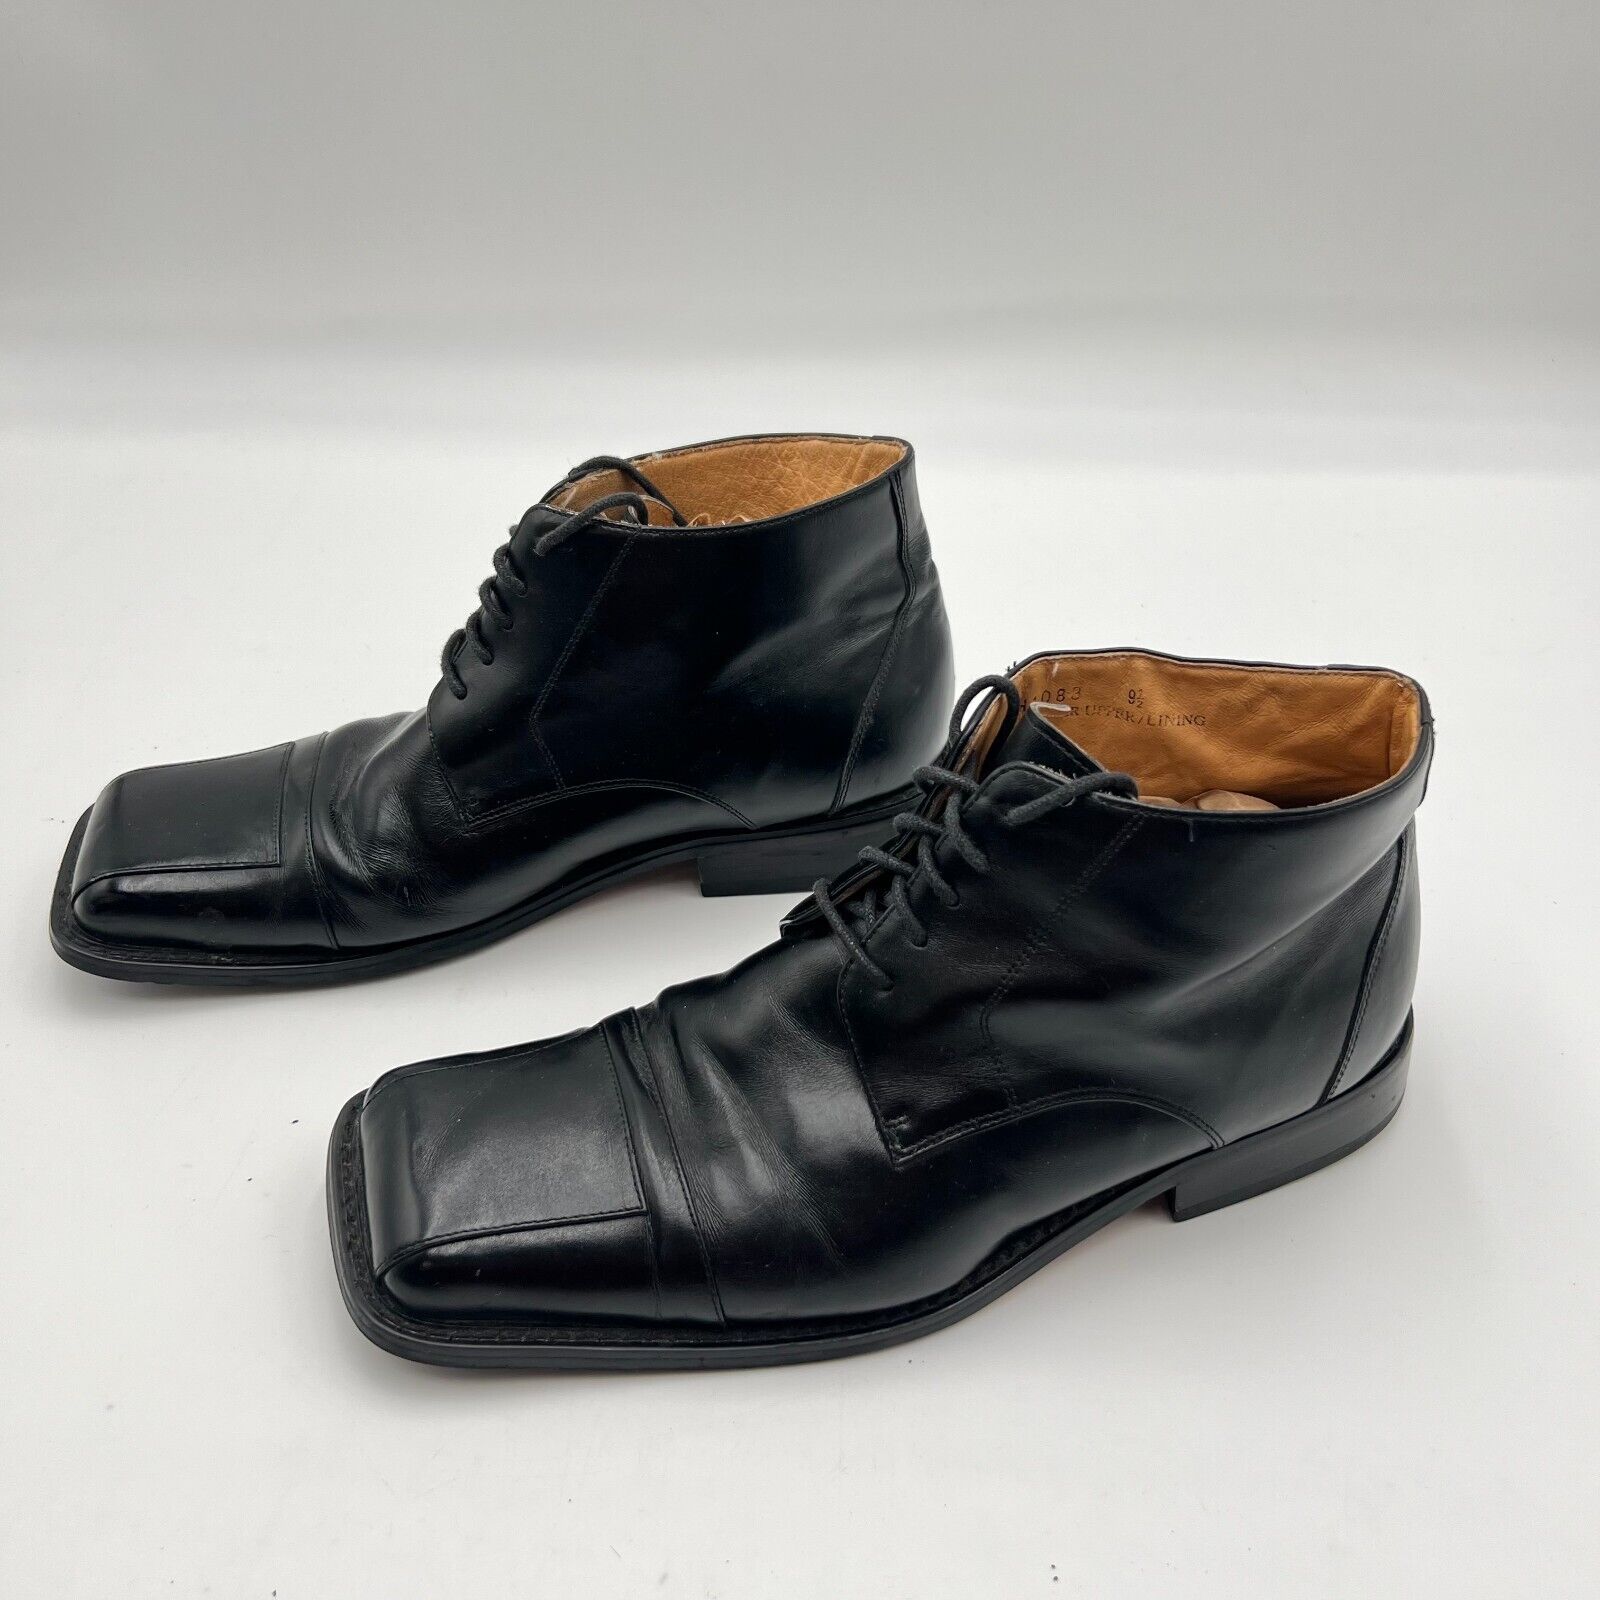 LA Milano Italy Collection Black Leather Square Toe Dress Shoes Mens Size 9.5